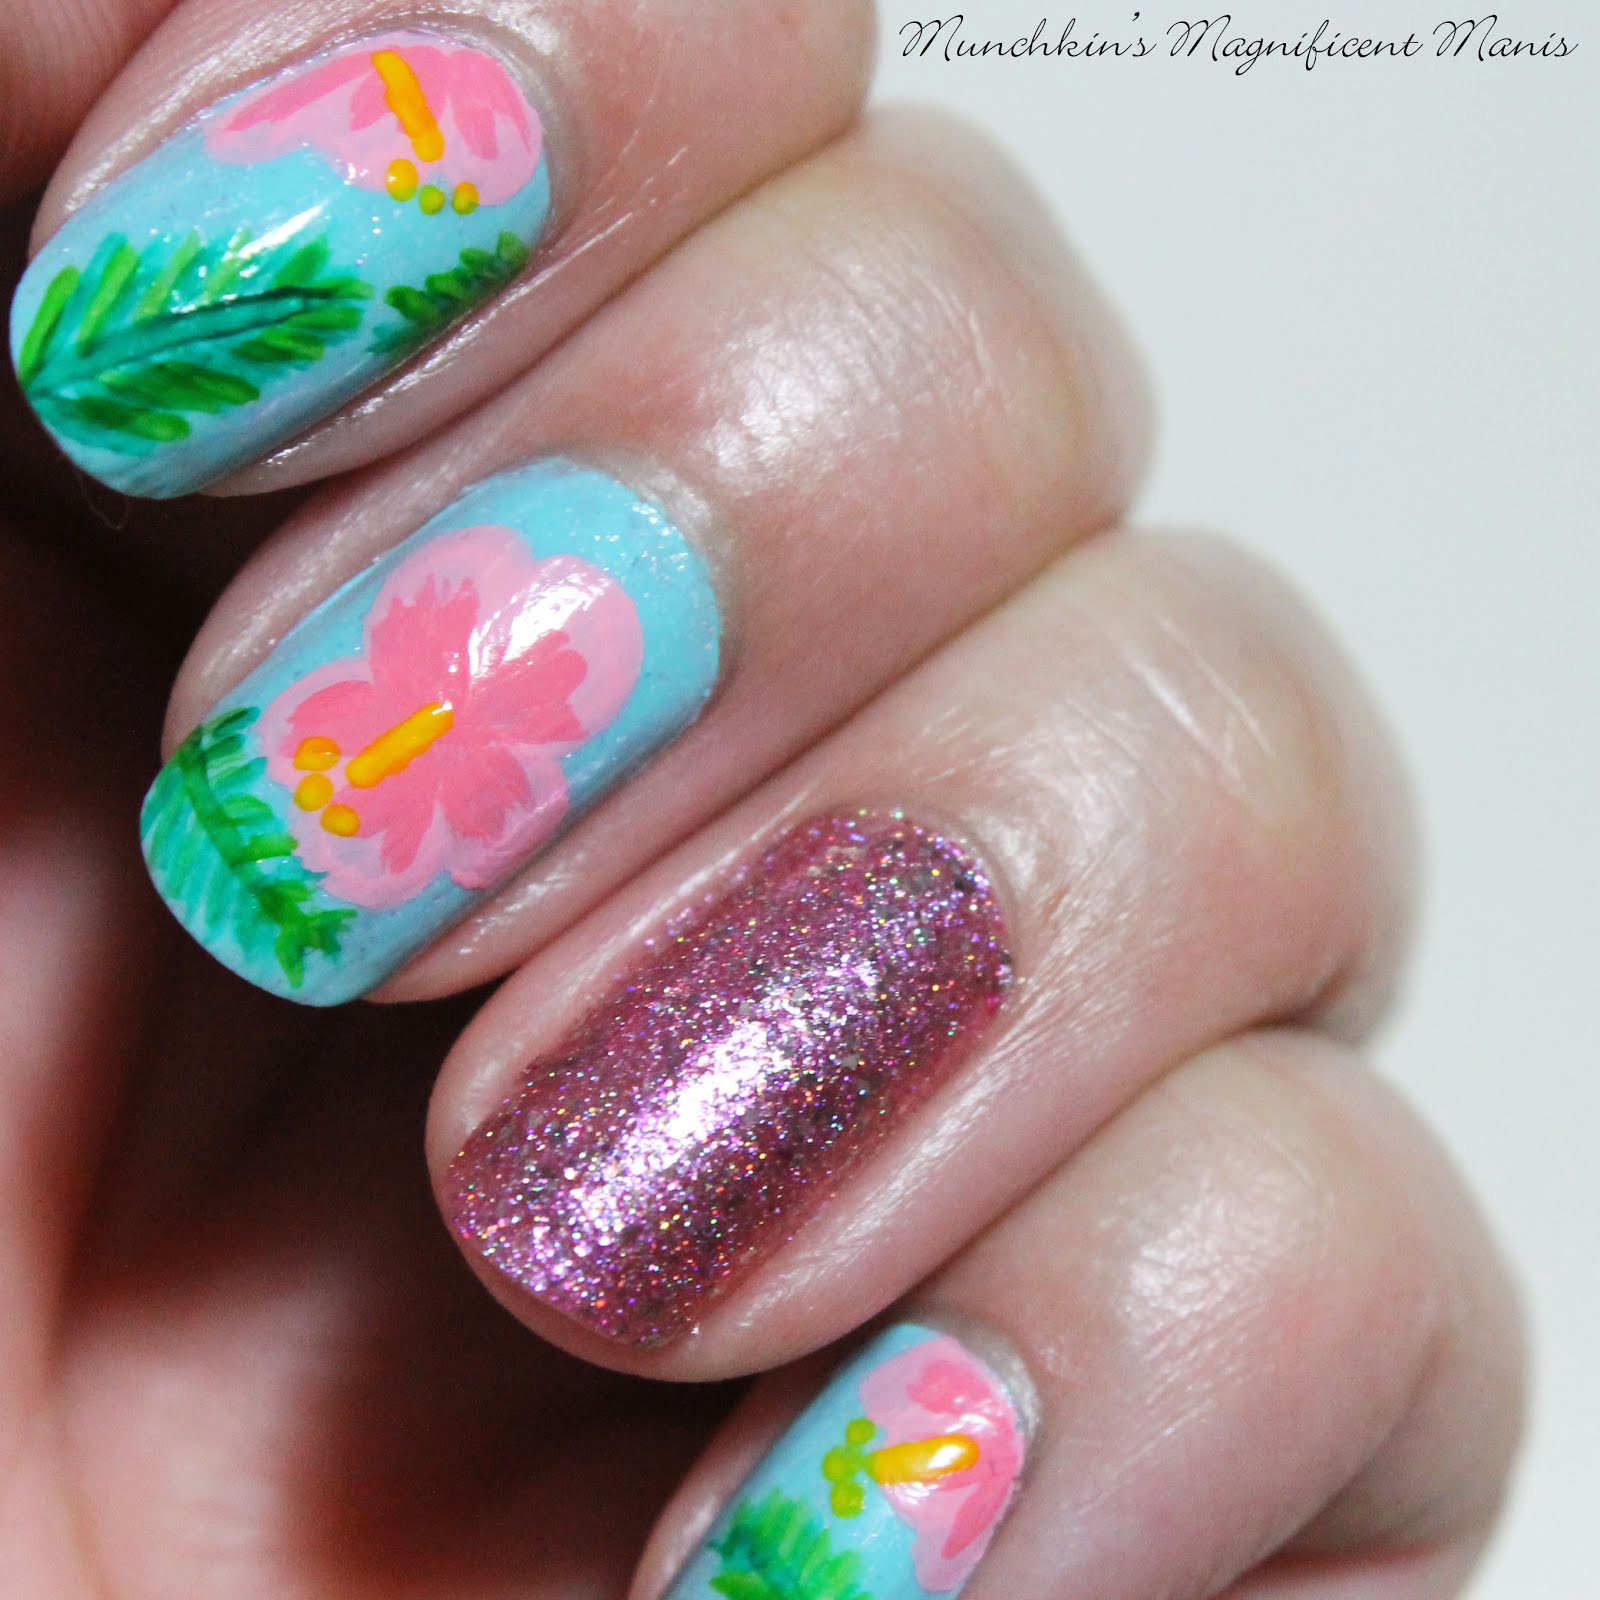 Munchkin’s Magnificent Manis: Aloha Flowers- Hibiscus flower Nail Design